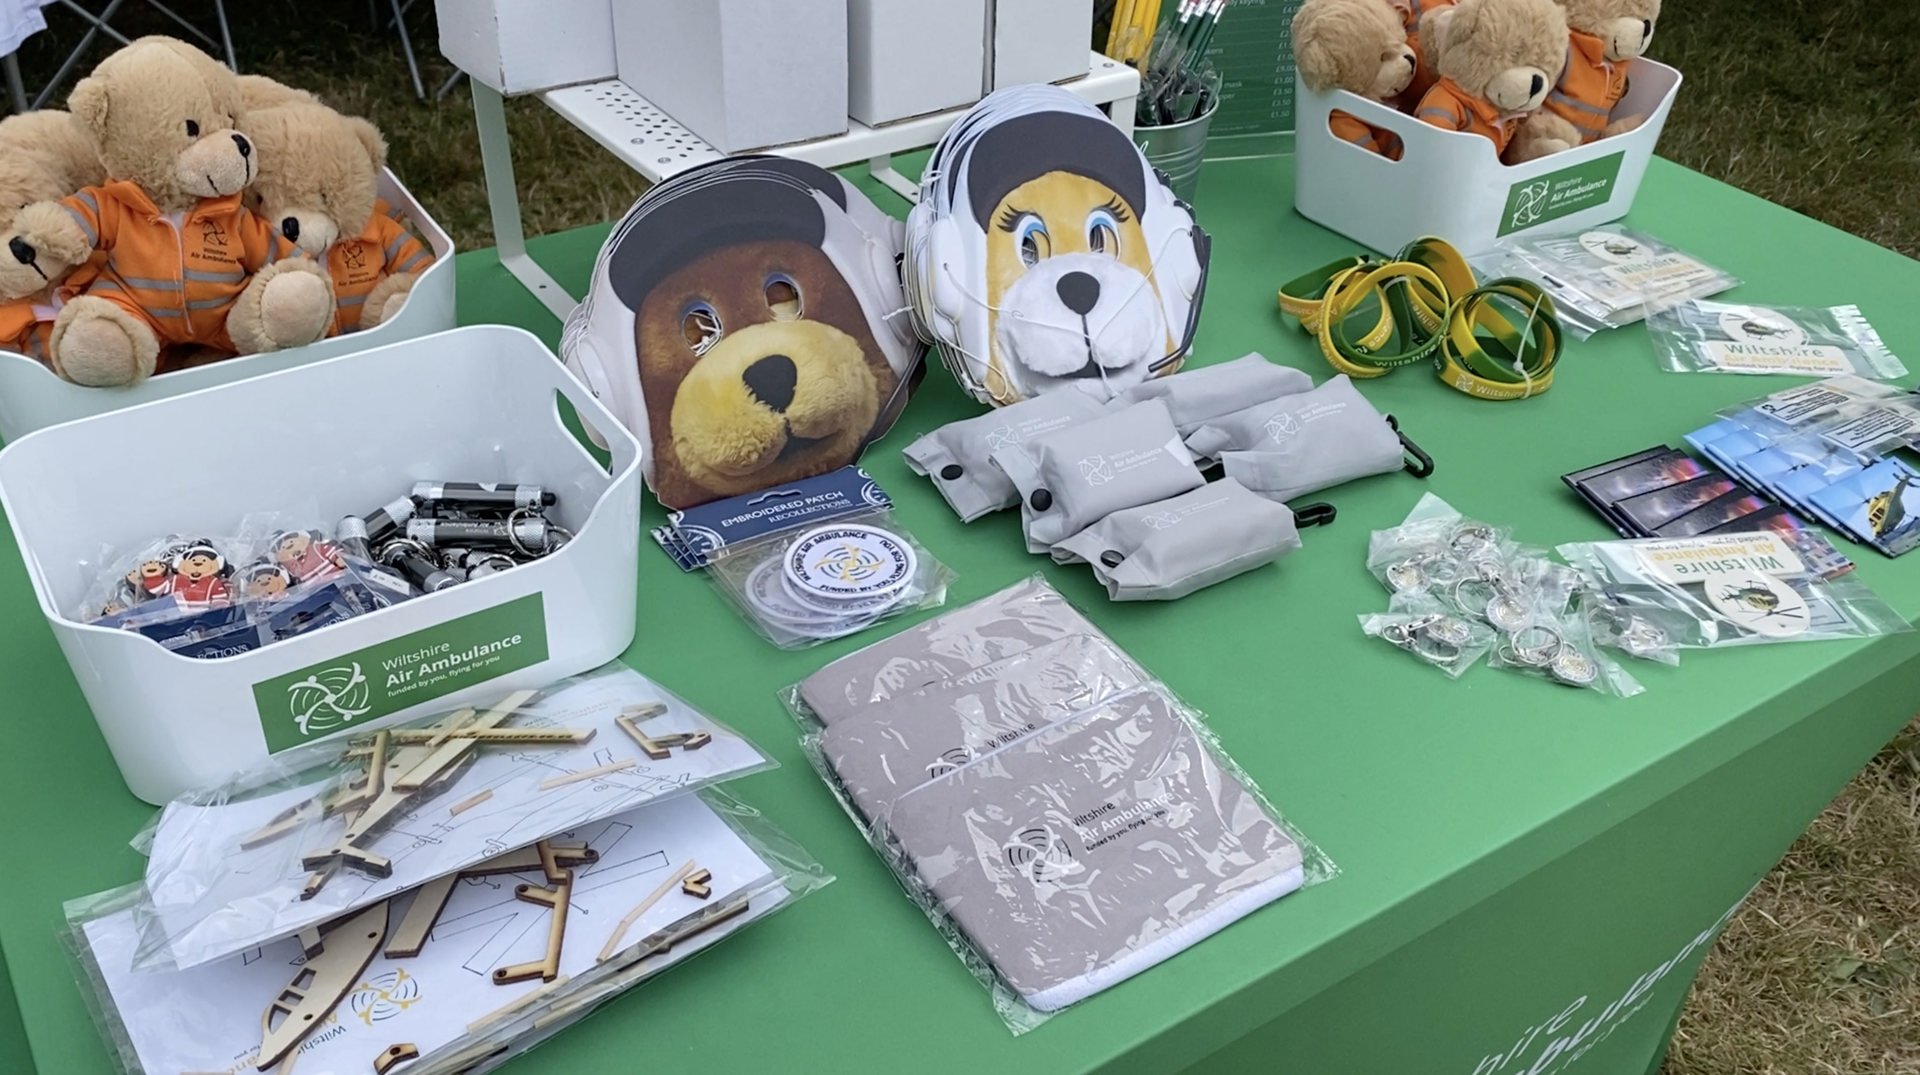 A table with WAA branded merchandise